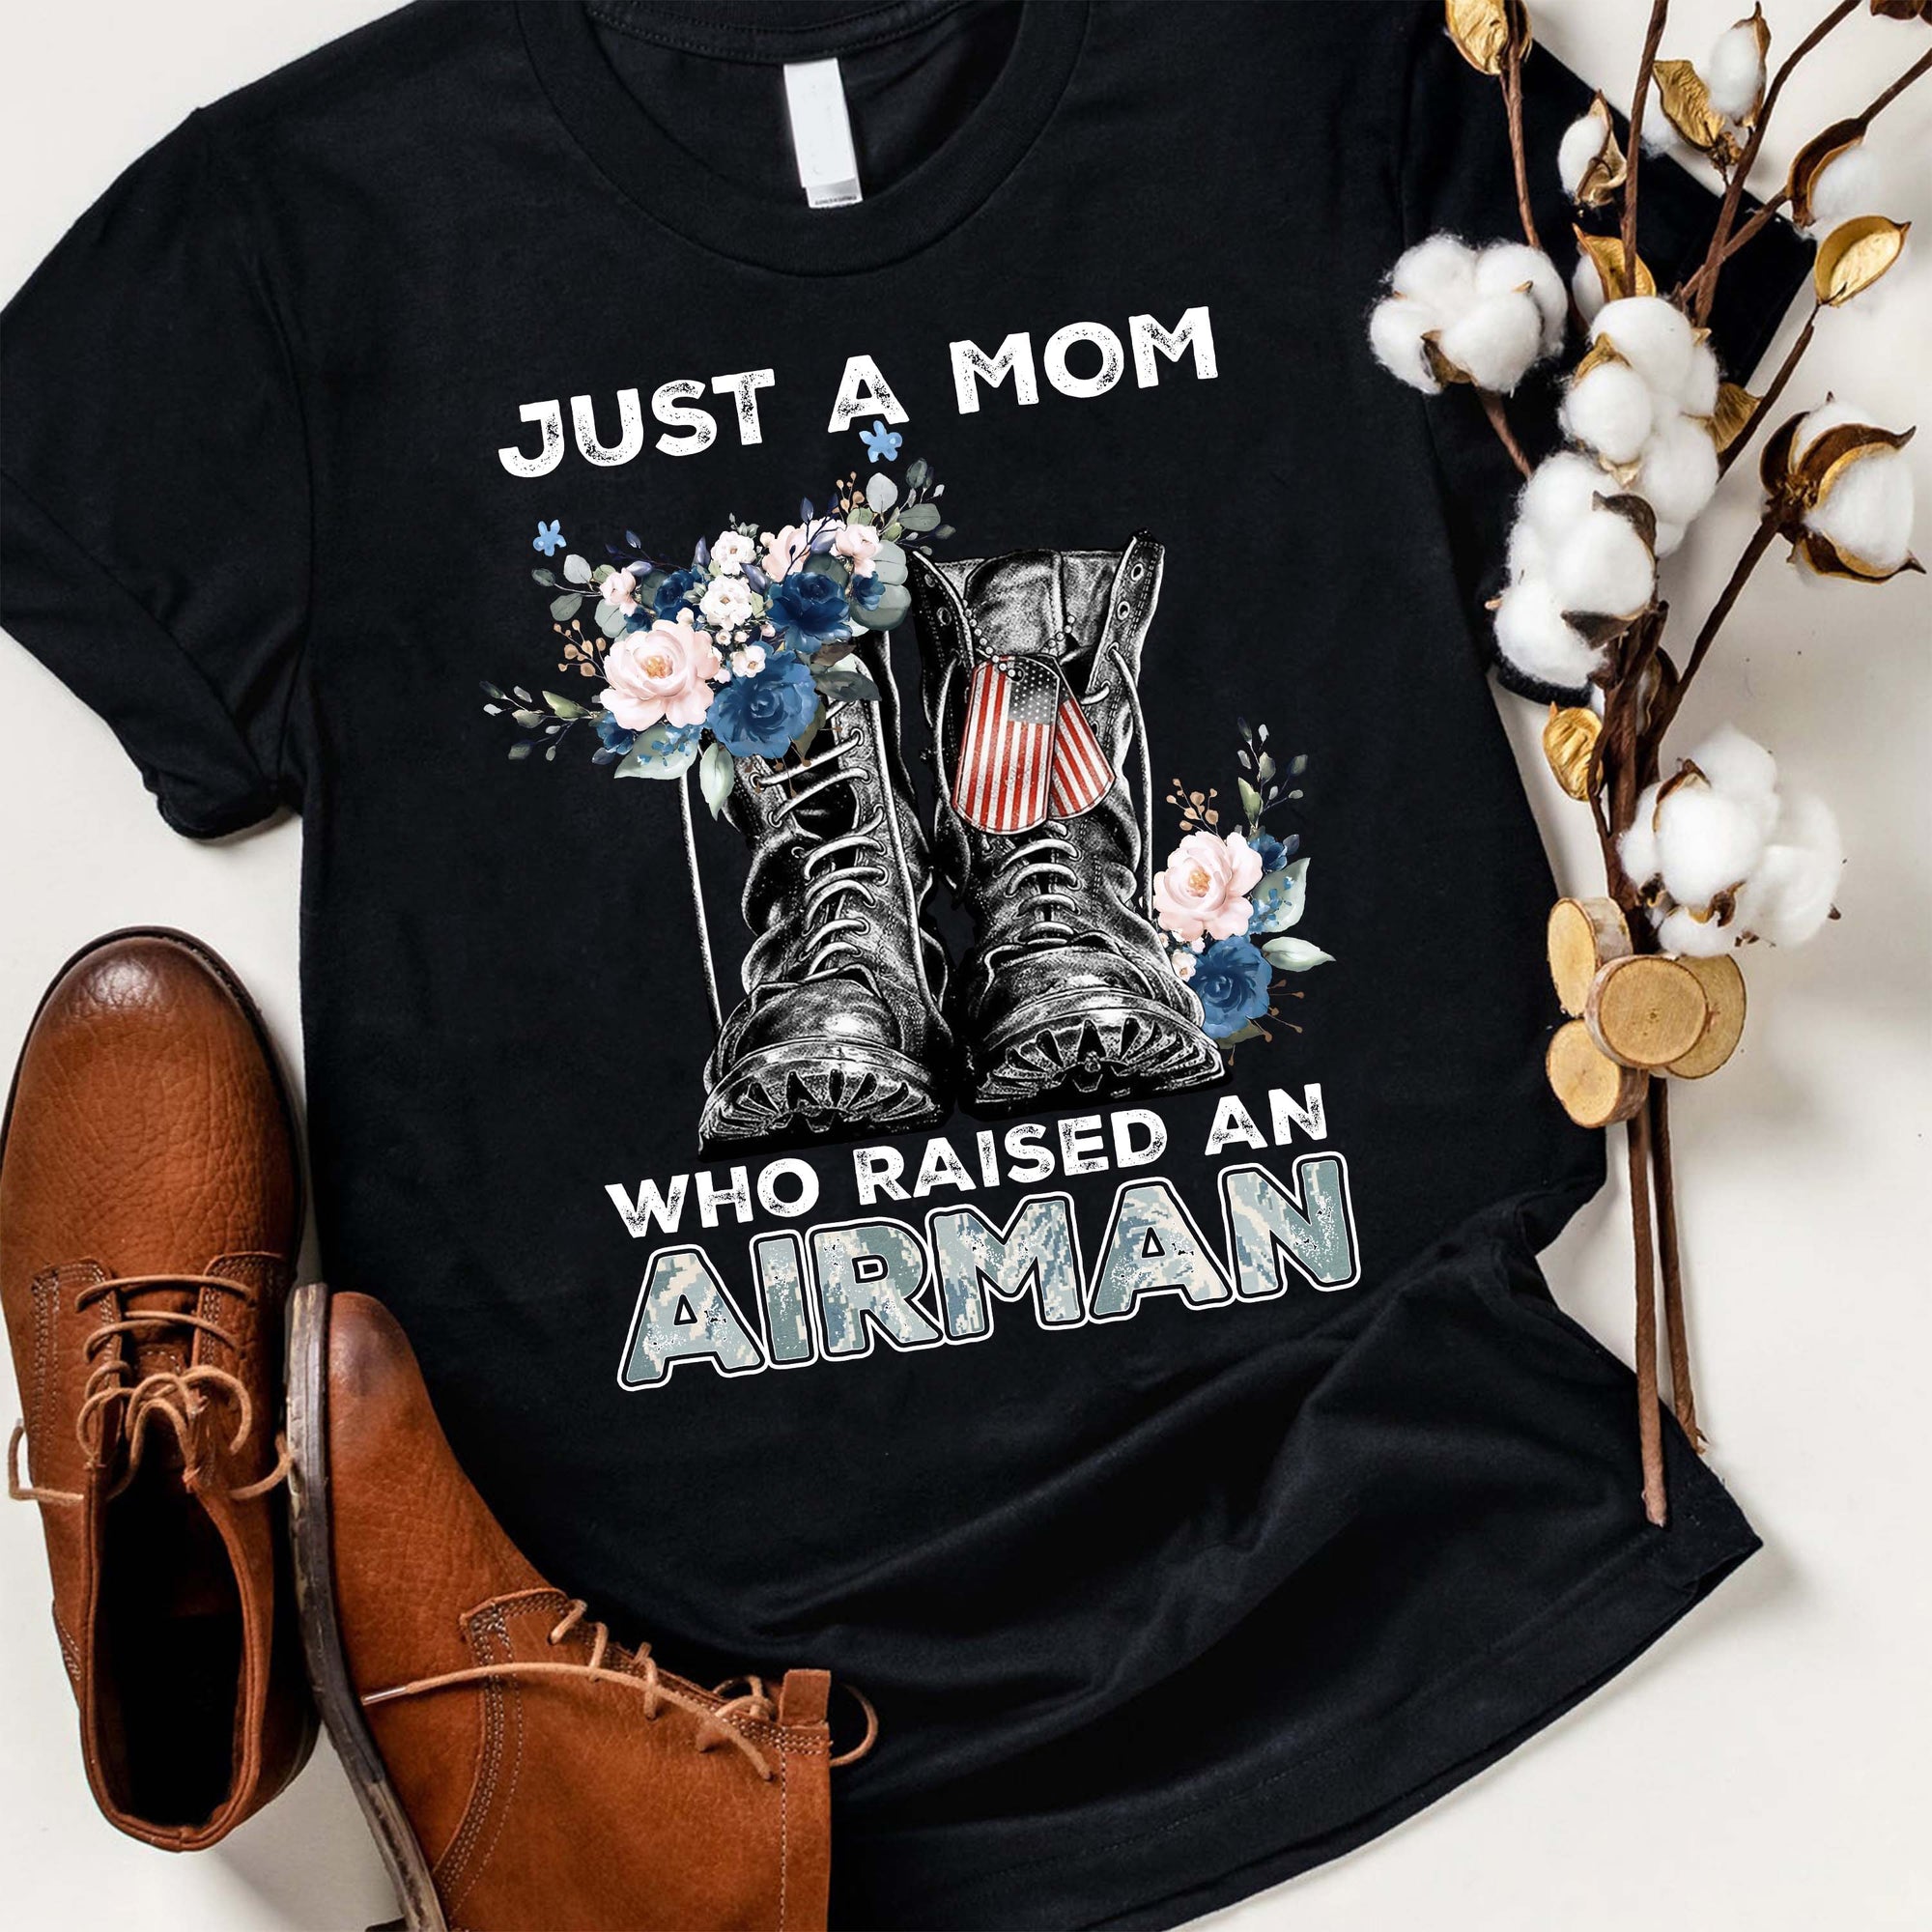 Just A Mom Who Raised An Airman Air Force Mom Military Mom Long Sleeve Women's V-neck Tank